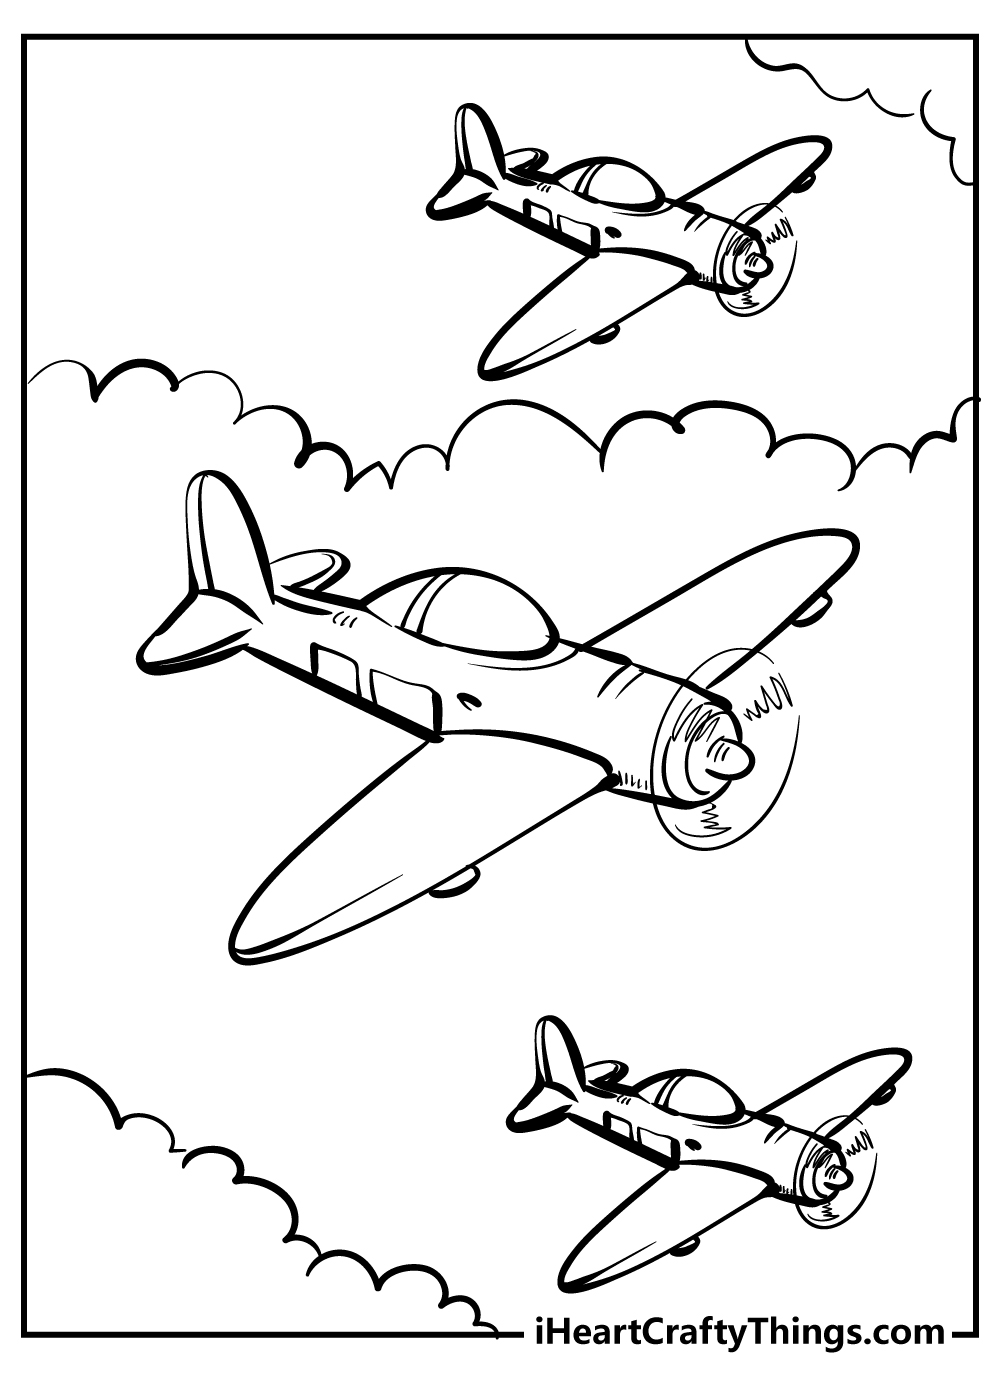 Printable Airplane Coloring Pages Updated 20